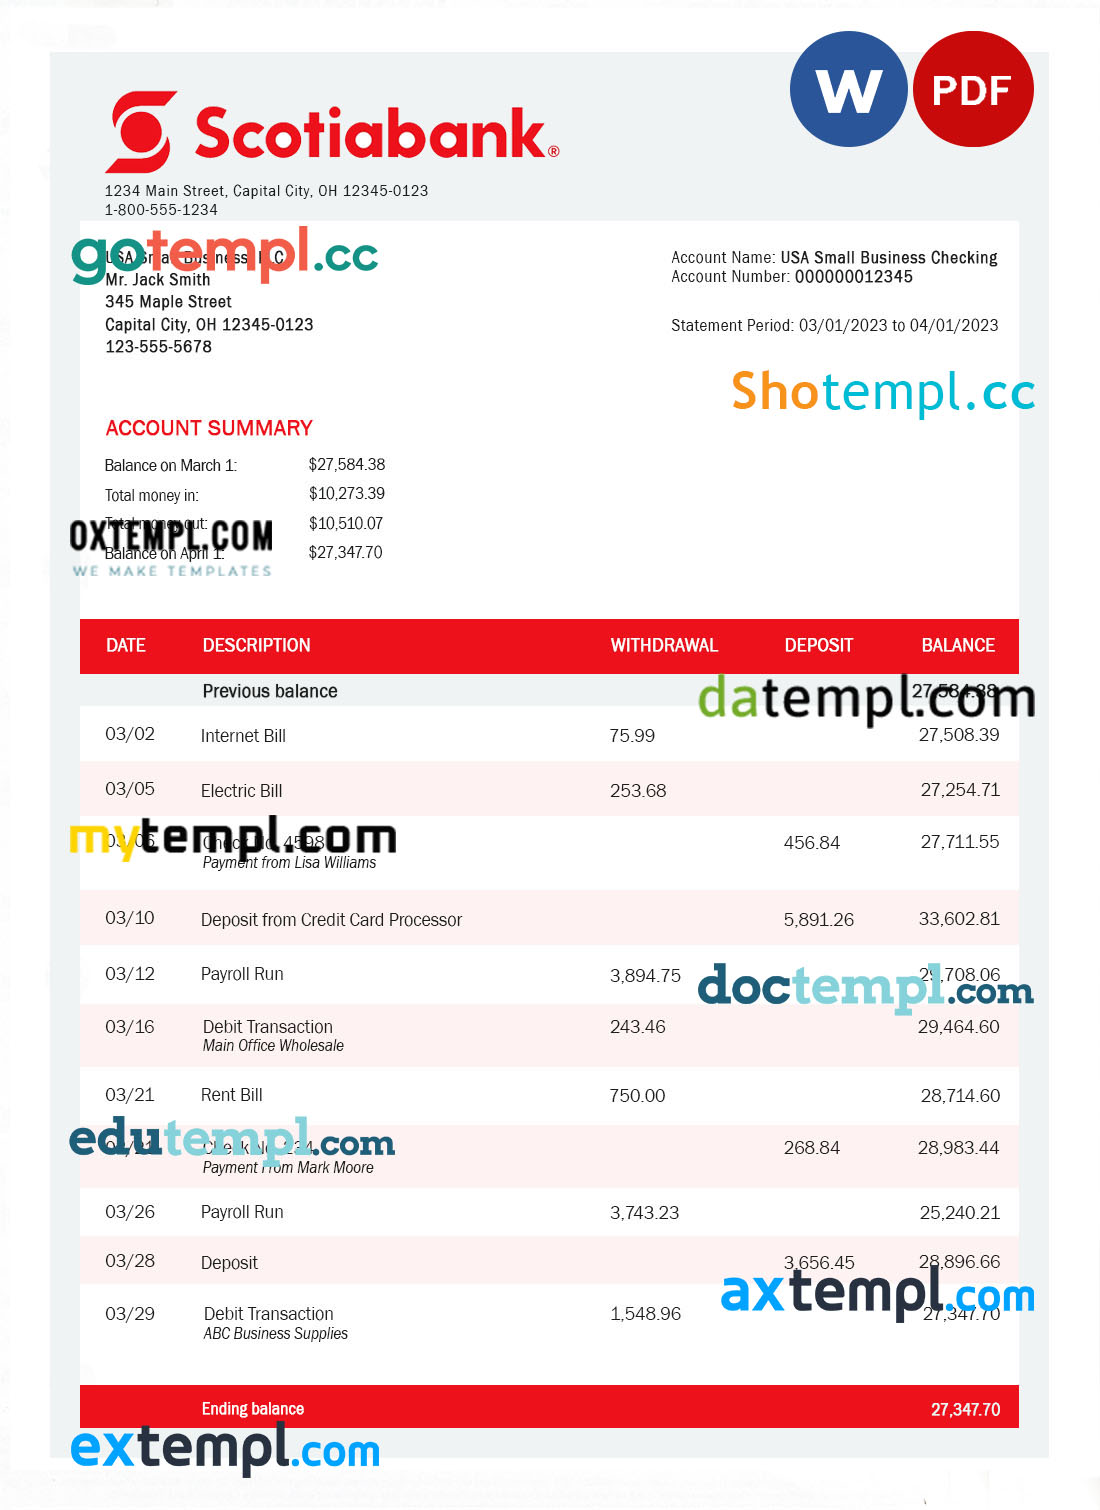 editable template, SCOTIABANK Bank organization statement Word and PDF template